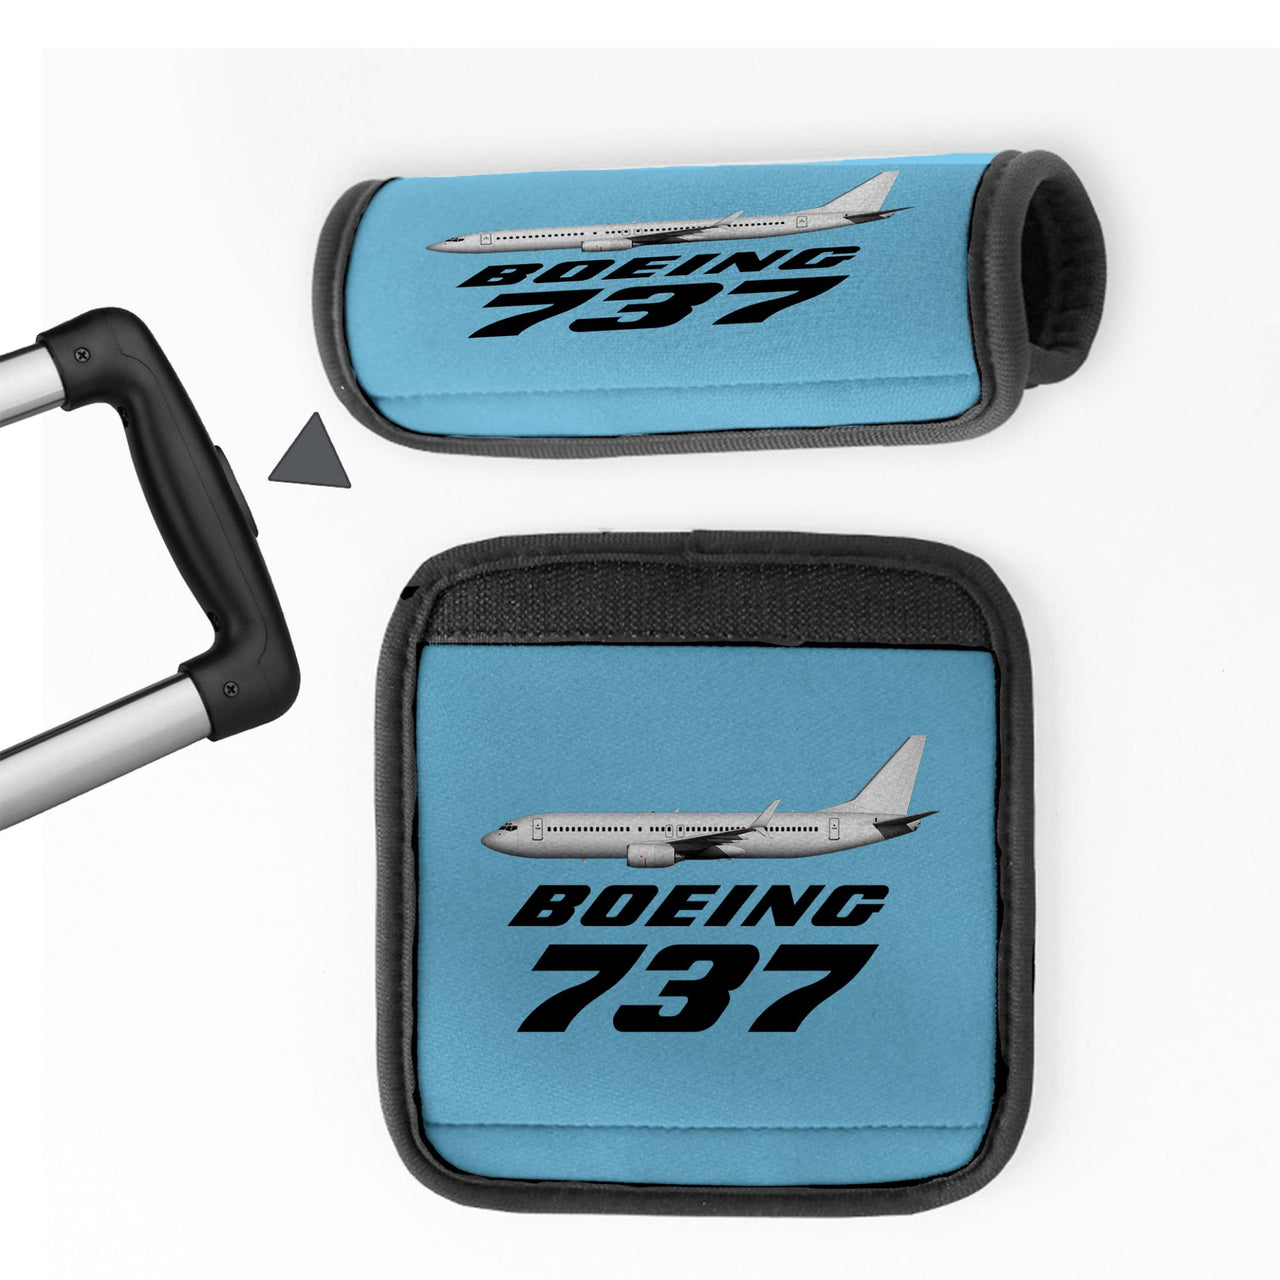 The Boeing 737 Designed Neoprene Luggage Handle Covers